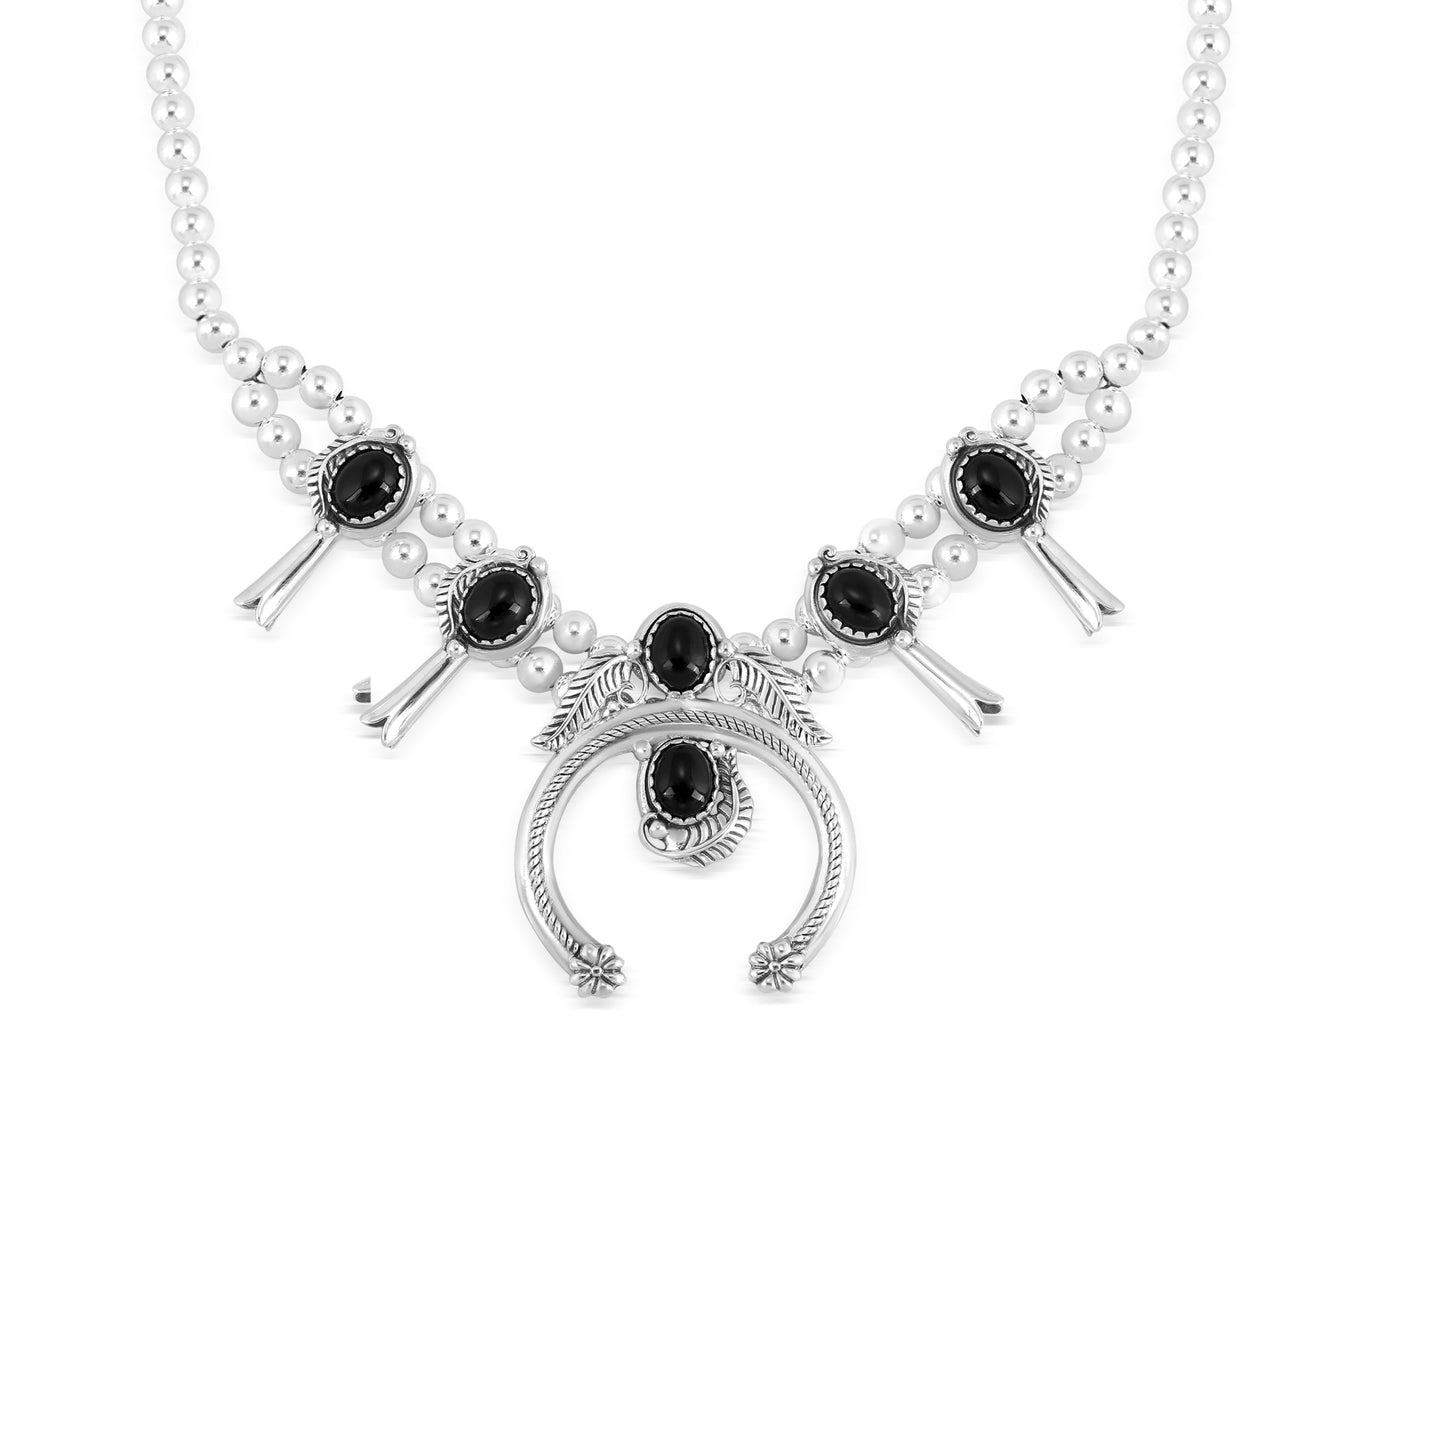 Sterling Silver with Black Agate Gemstone Squash Blossom Naja Design Women's Pendant Necklace, 16-19 Inches